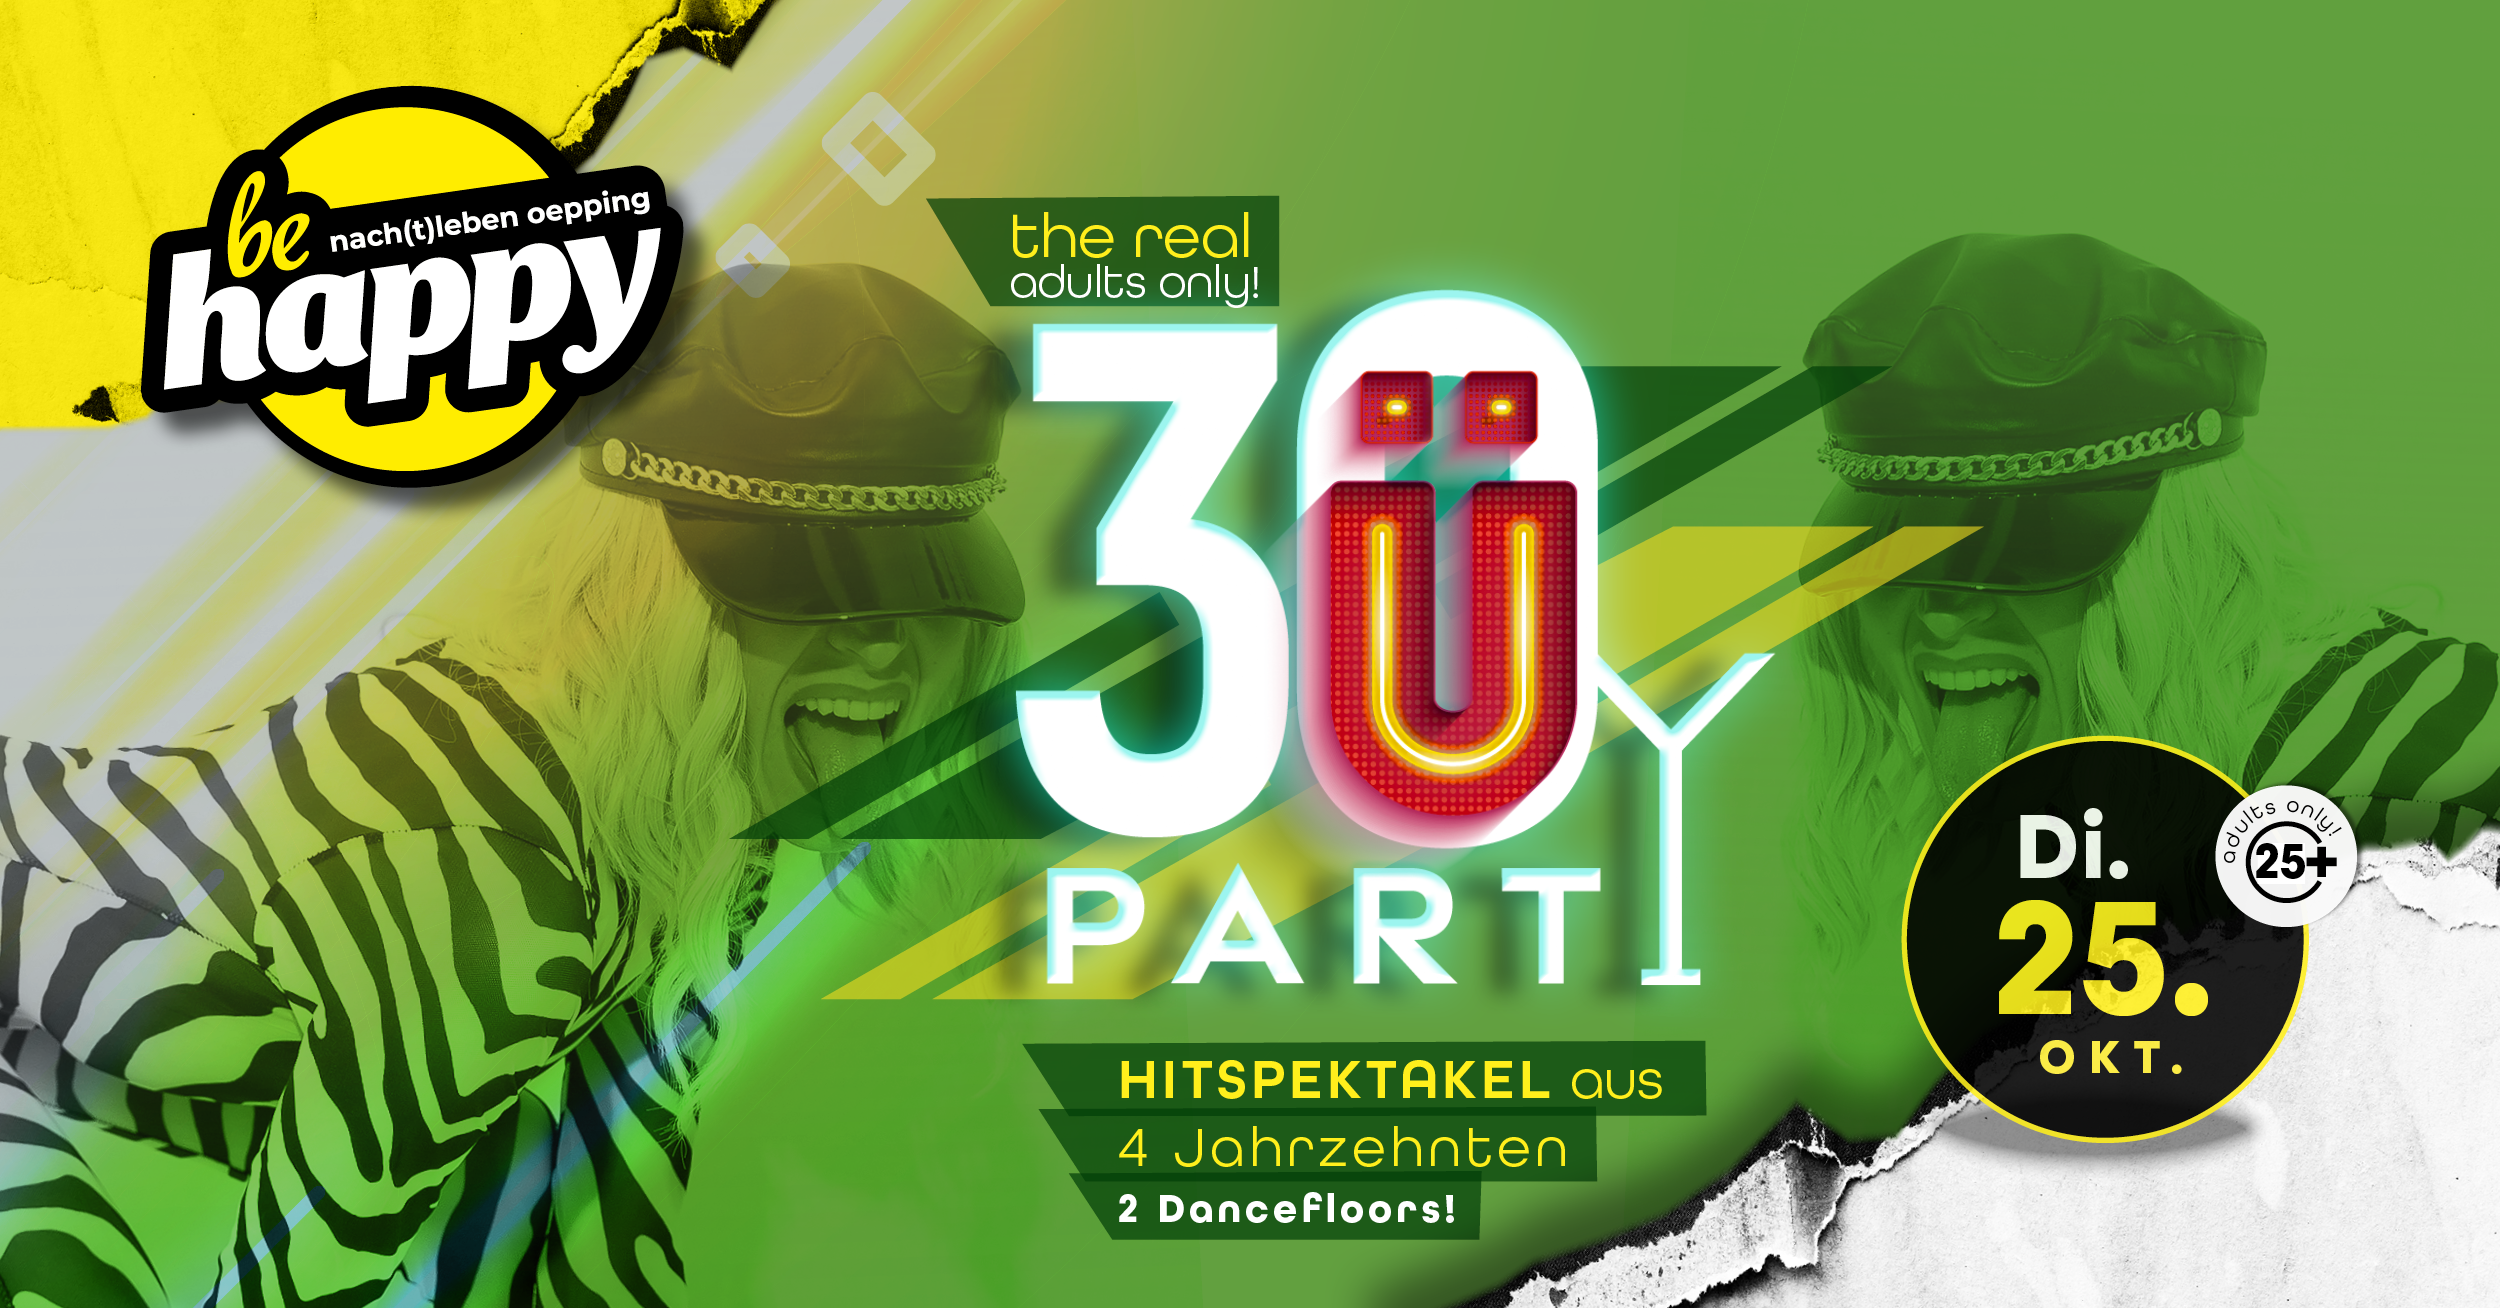 Ü30 Party - the real adults only | DI 25.10.